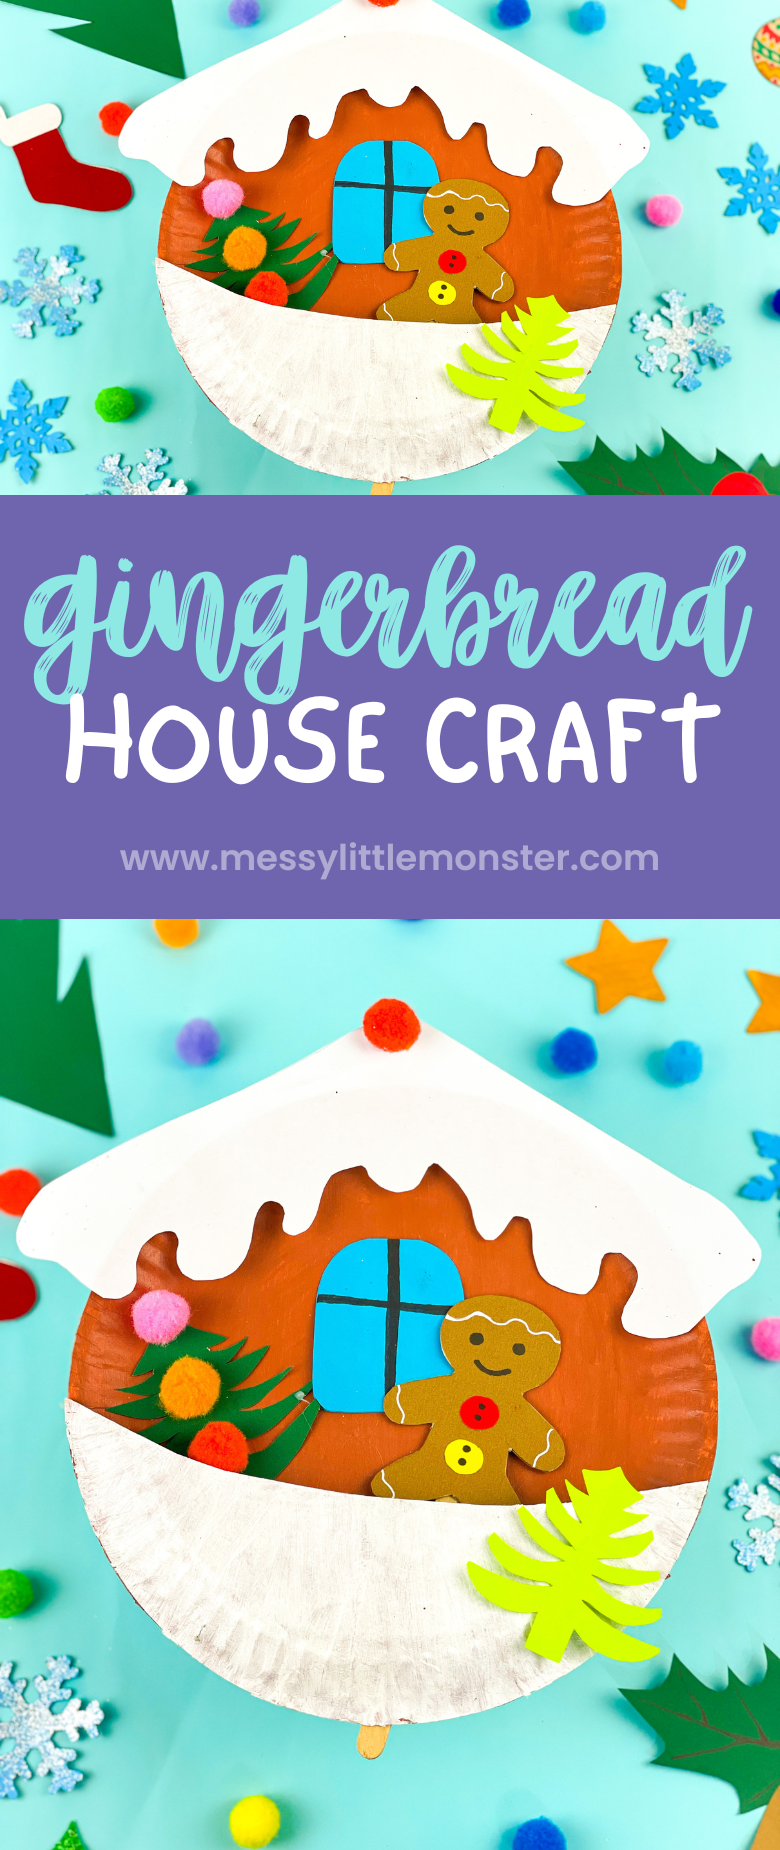 Gingerbread house craft with moving gingerbread man craft.